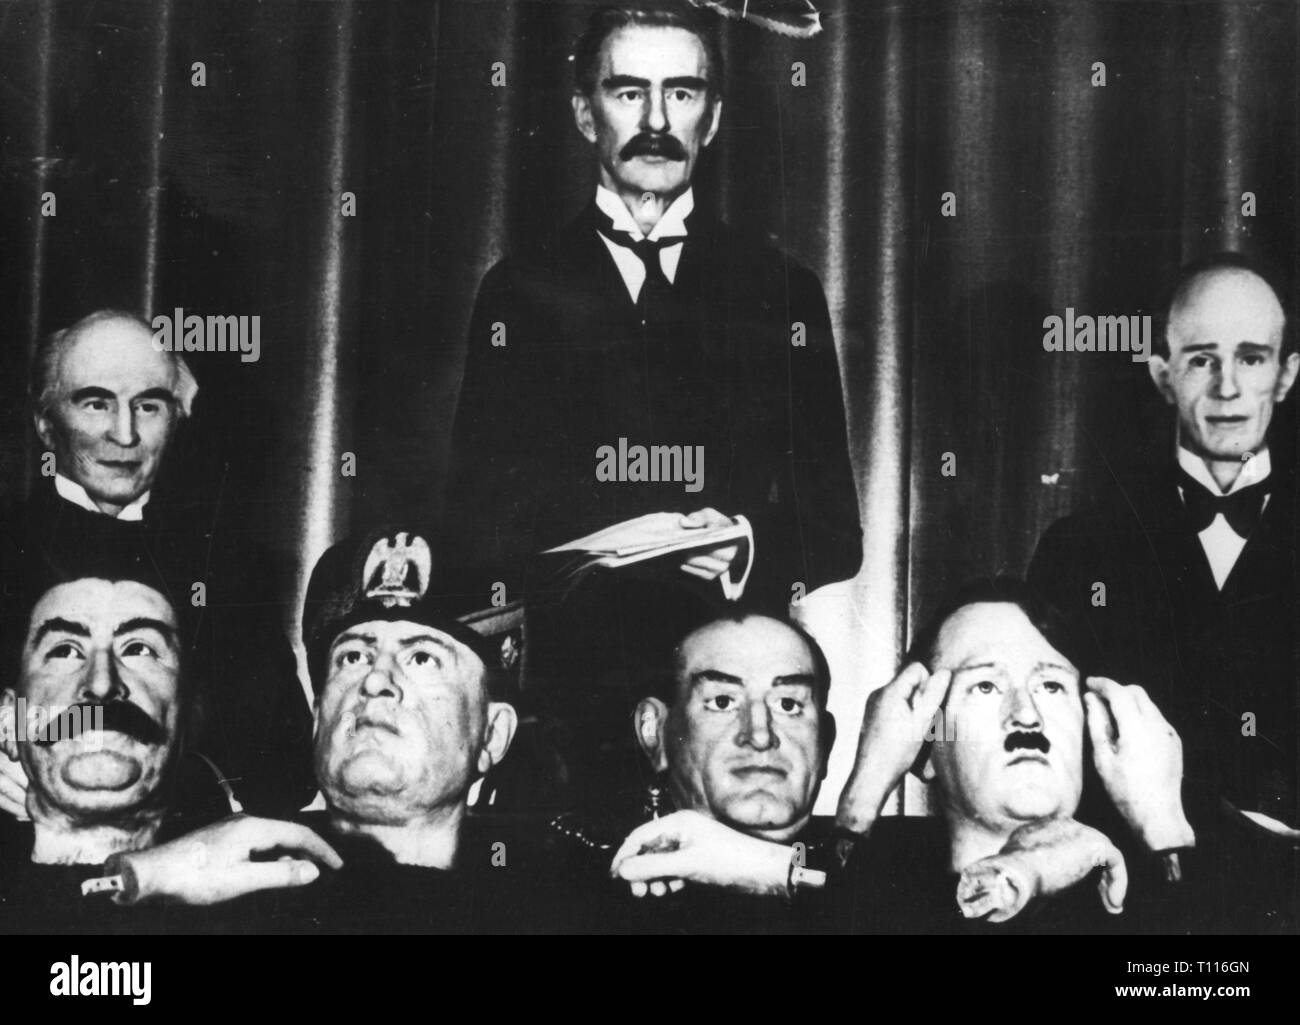 geography / travel historic, Great Britain, cities and communities, London, museums, Madame Tussauds, wax figures and heads of European politicians, forward row from left: Joseph Stalin, Benito Mussolini, Edouard Daladier, Adolf Hitler, rearward row from left: John Simon, Arthur Neville Chamberlain, Edward Wood Lord Halifax, 1939, Additional-Rights-Clearance-Info-Not-Available Stock Photo